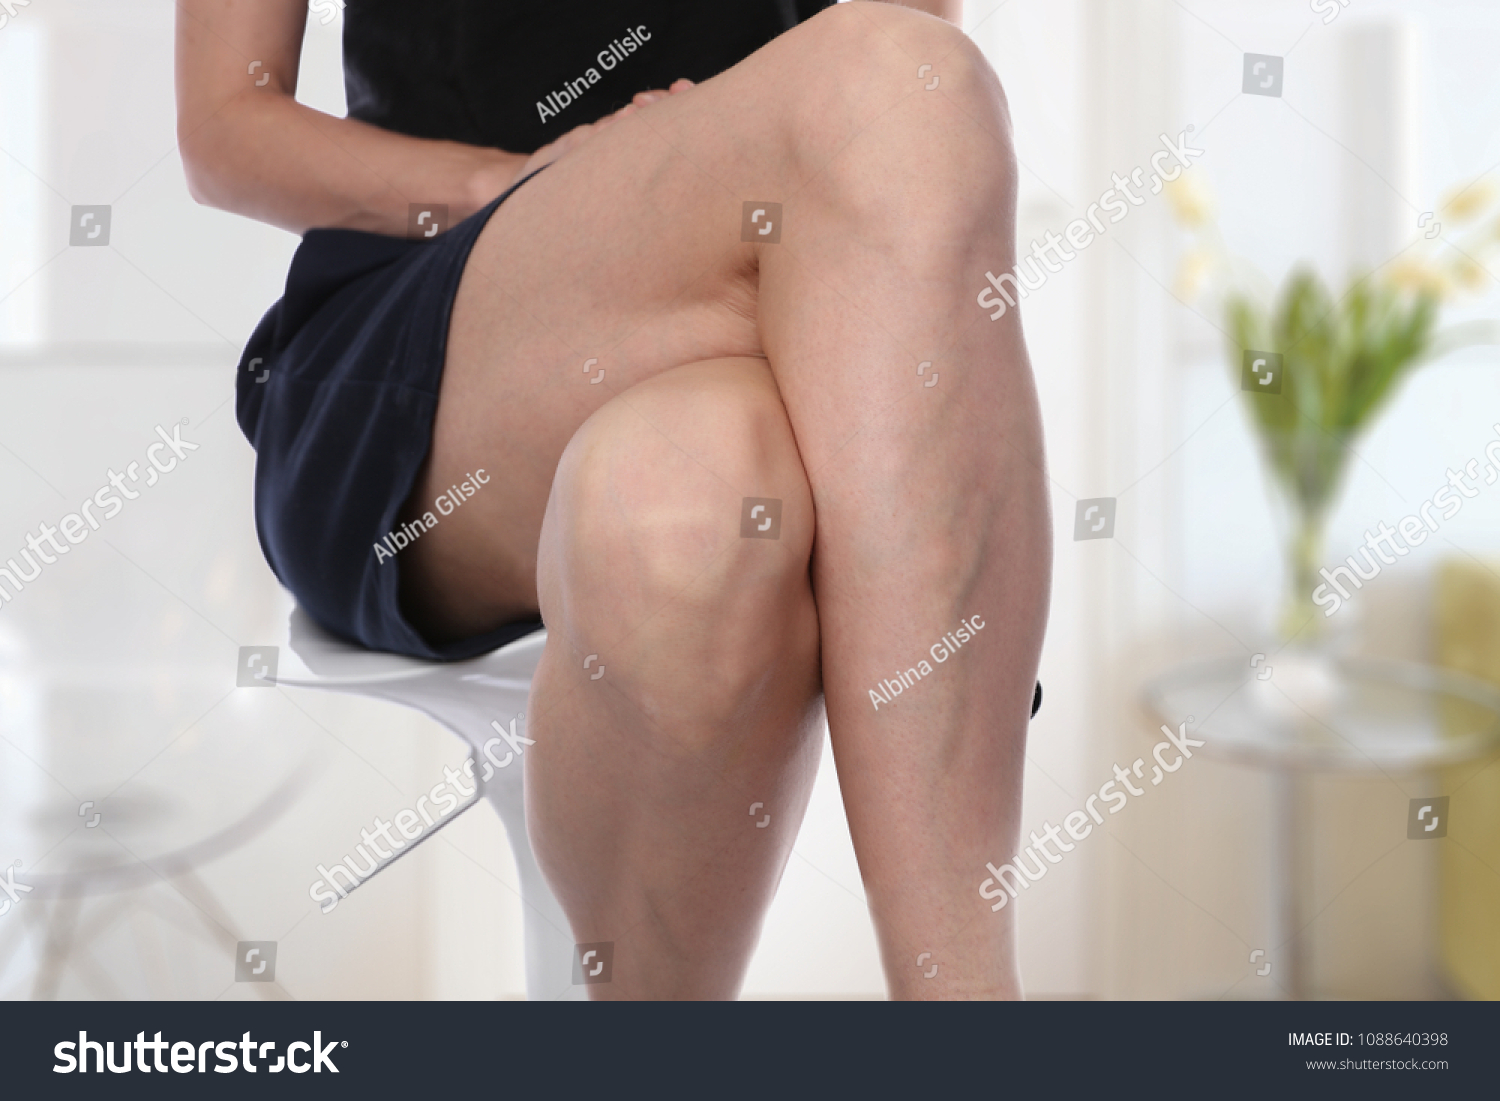 Painful varicose and spider veins on female legs. #1088640398